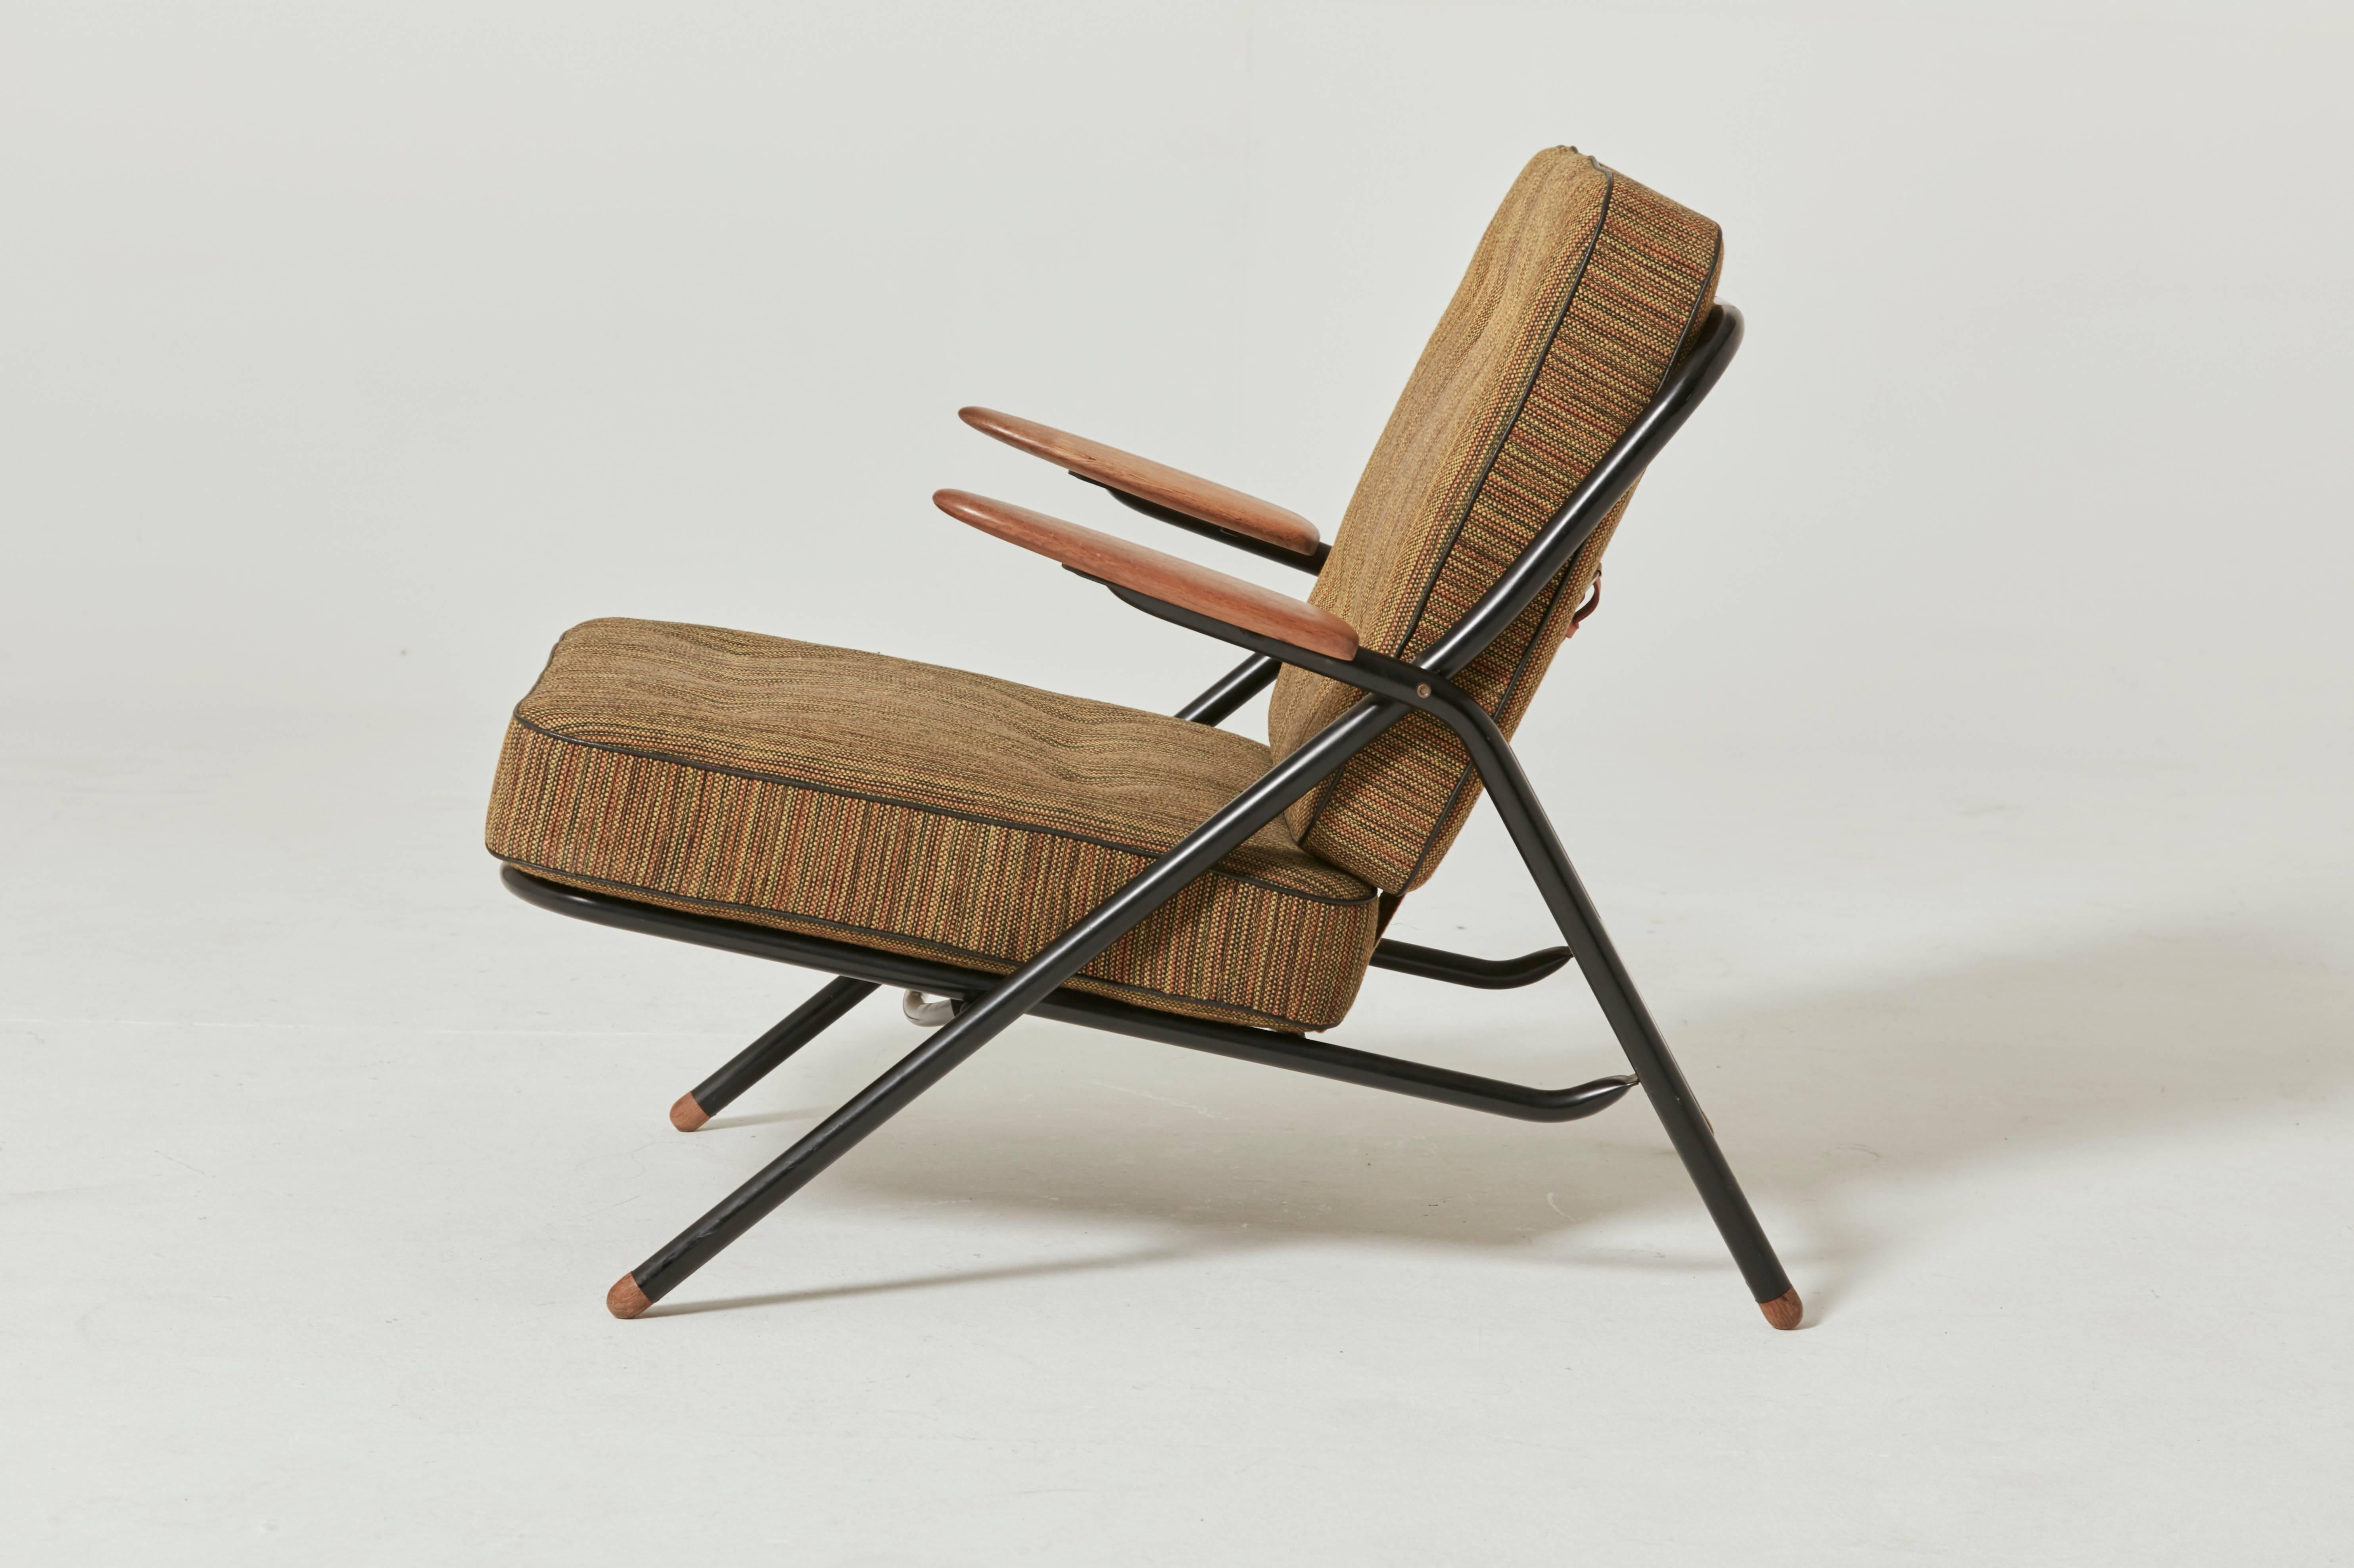 Rare Hans Wegner GE215 Sawbuck chair, Denmark, 1950s. Excellent condition. Ships worldwide.

This chair was shown at the 1955 great Nordic design exhibition in Helsingborg, Sweden. In this Wegner combined diverse materials, into one harmonious